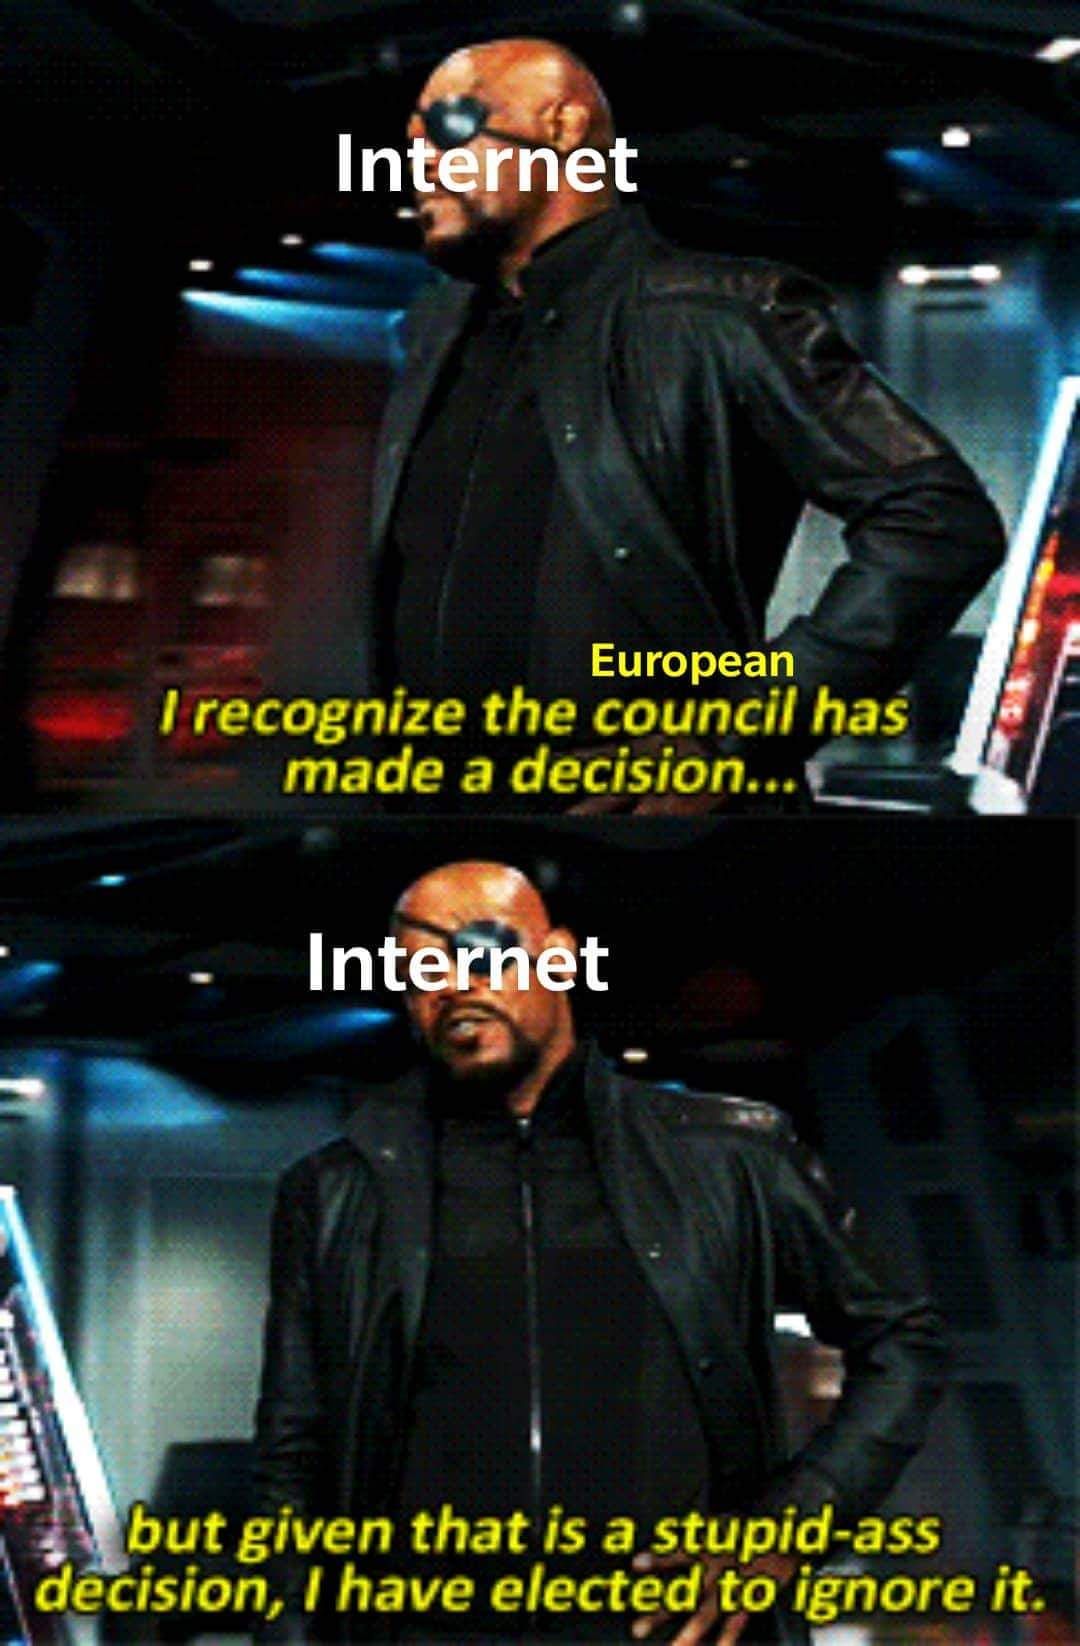 There's Fury over article 13! Again!